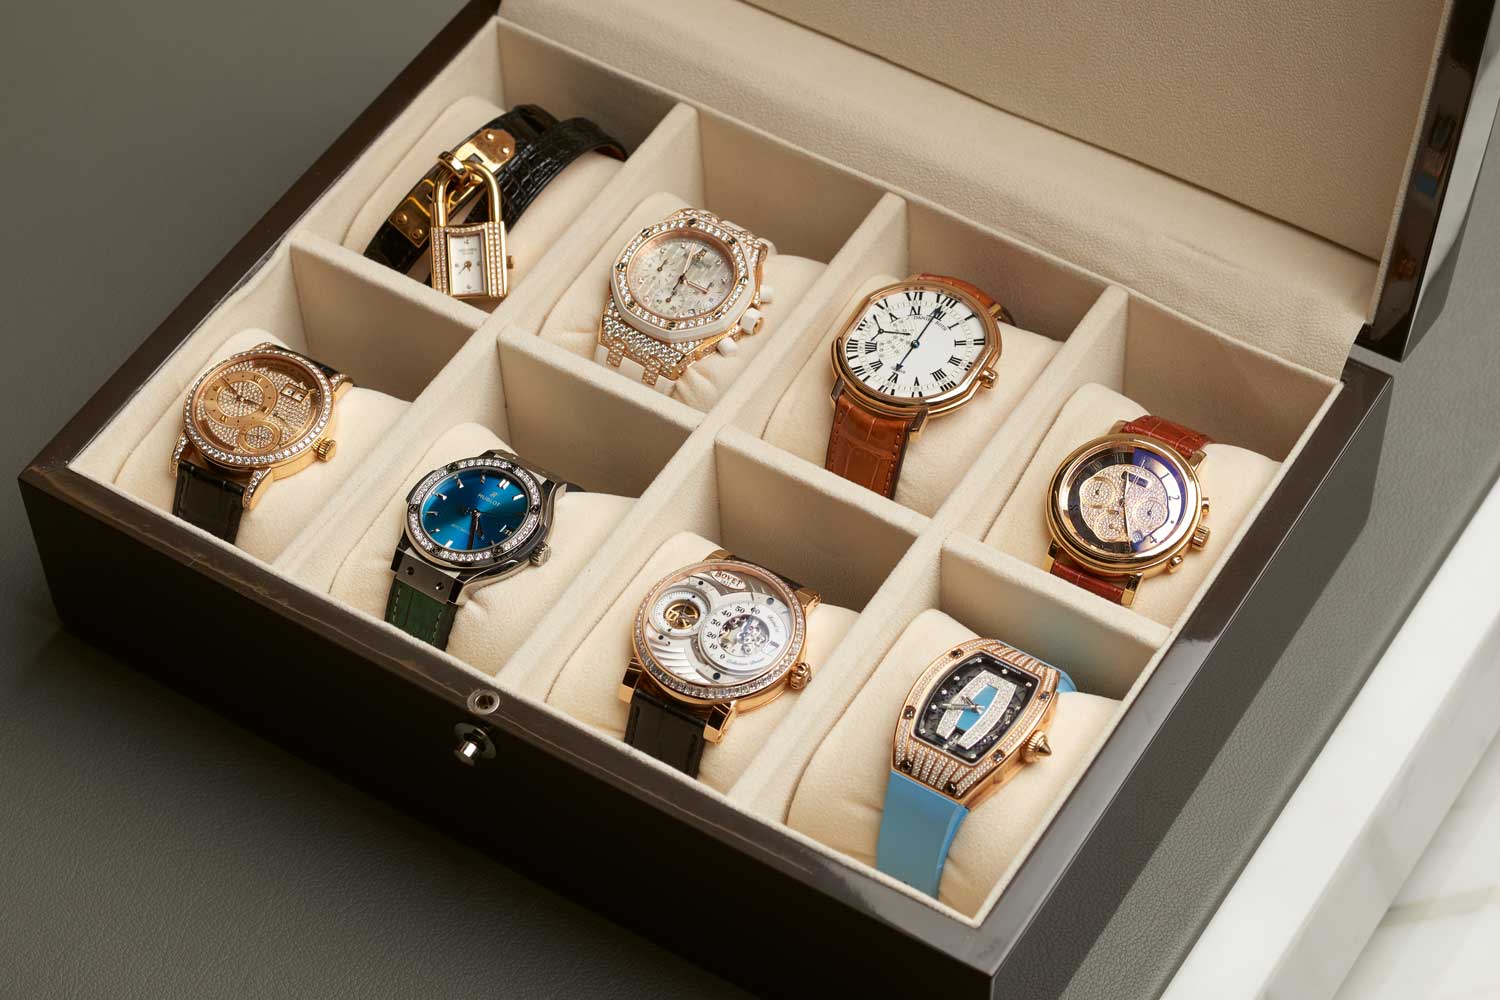 With over 30 watches in her collection, Hind chooses her timepieces carefully, with each having its own unique personality and story.